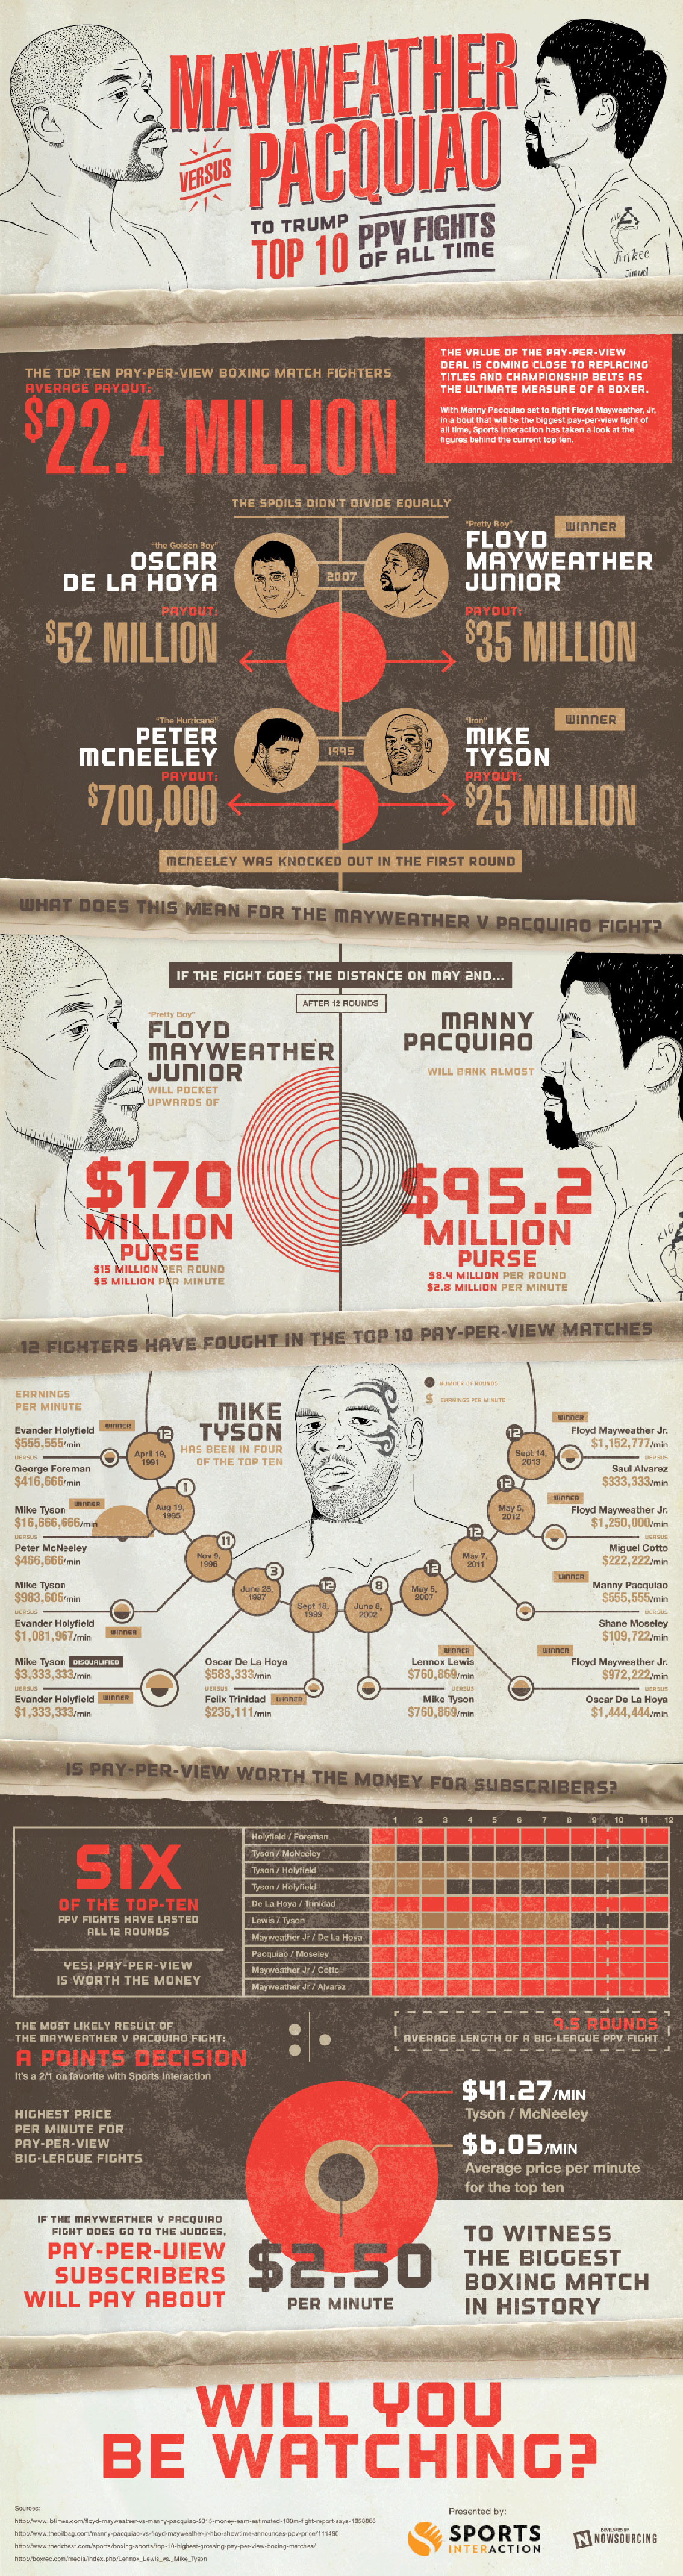 Mayweather vs Pacquiao Pay Per View Record - Boxing Infographic